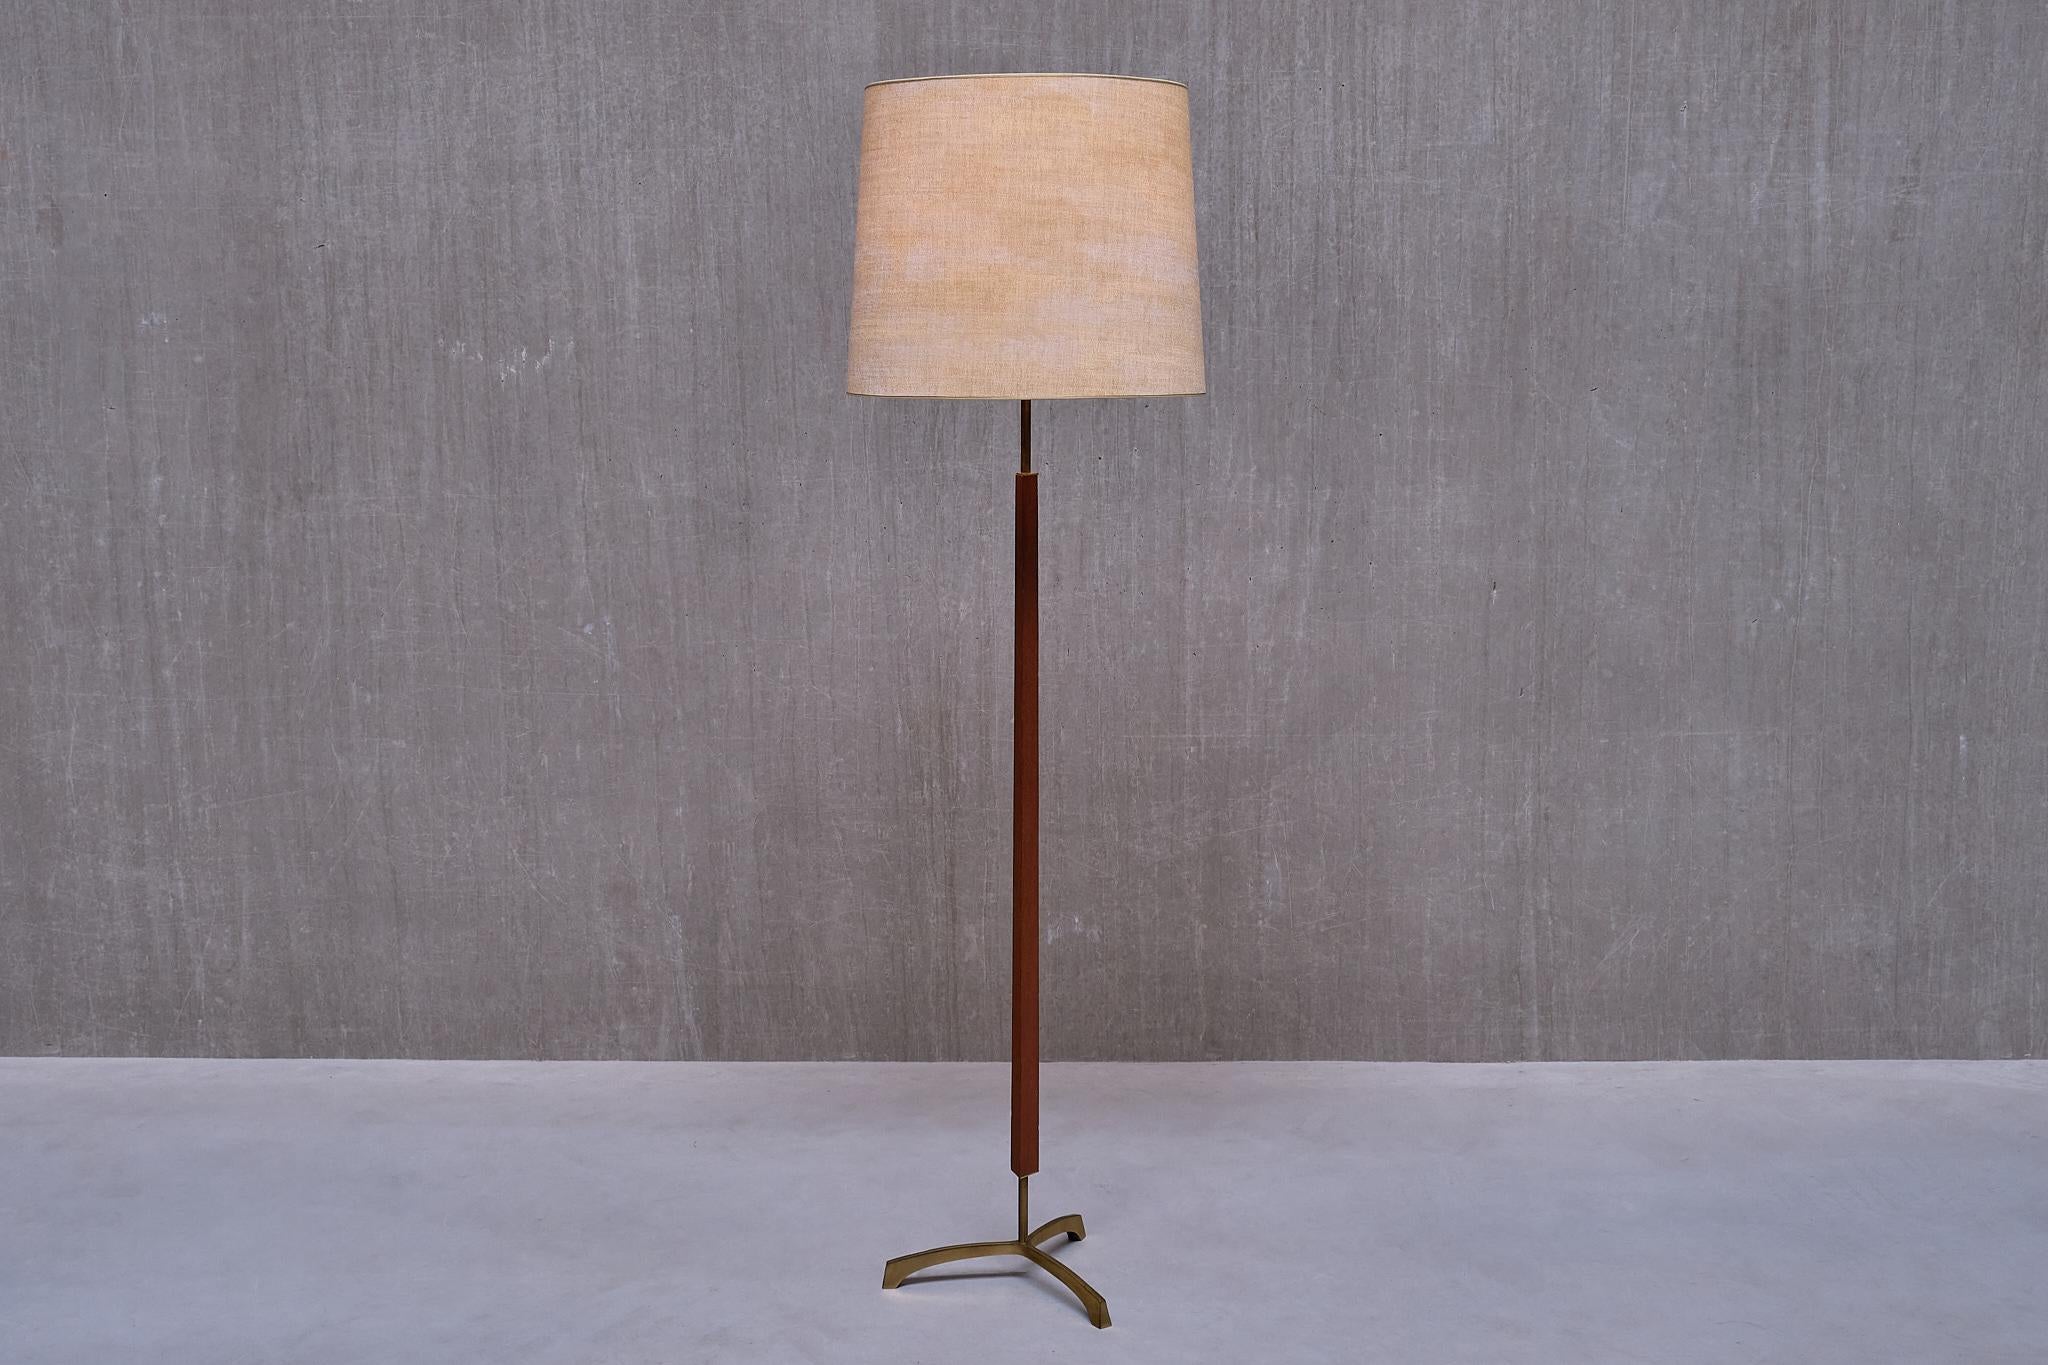 This rare floor lamp was produced in Denmark in the late 1950s. 

The lamp features a distinctive slightly raised, three legged base crafted from solid brass. The central stem in teak wood is made in a triangular shape, adding to the architectural